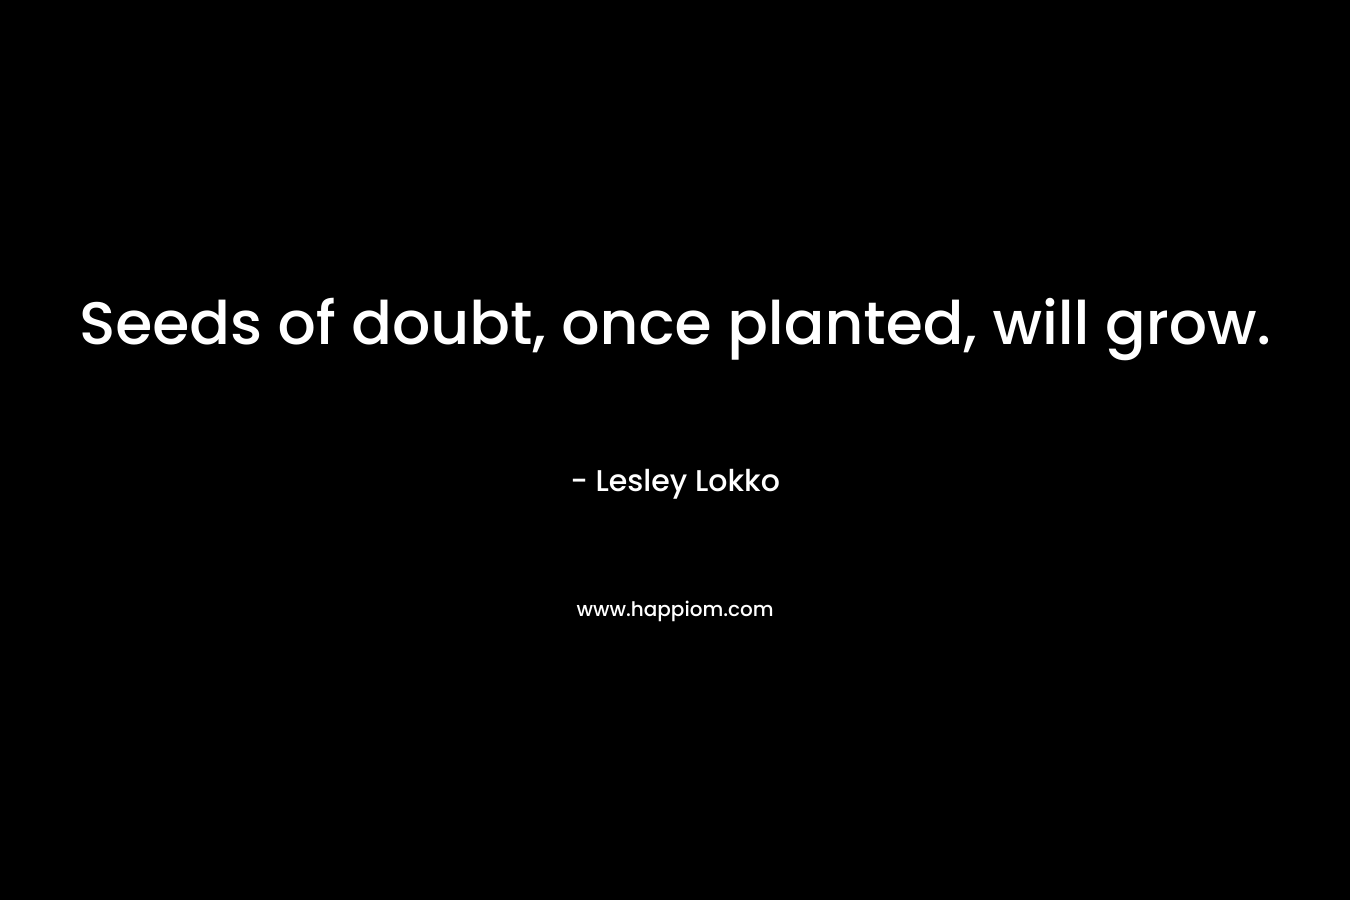 Seeds of doubt, once planted, will grow.